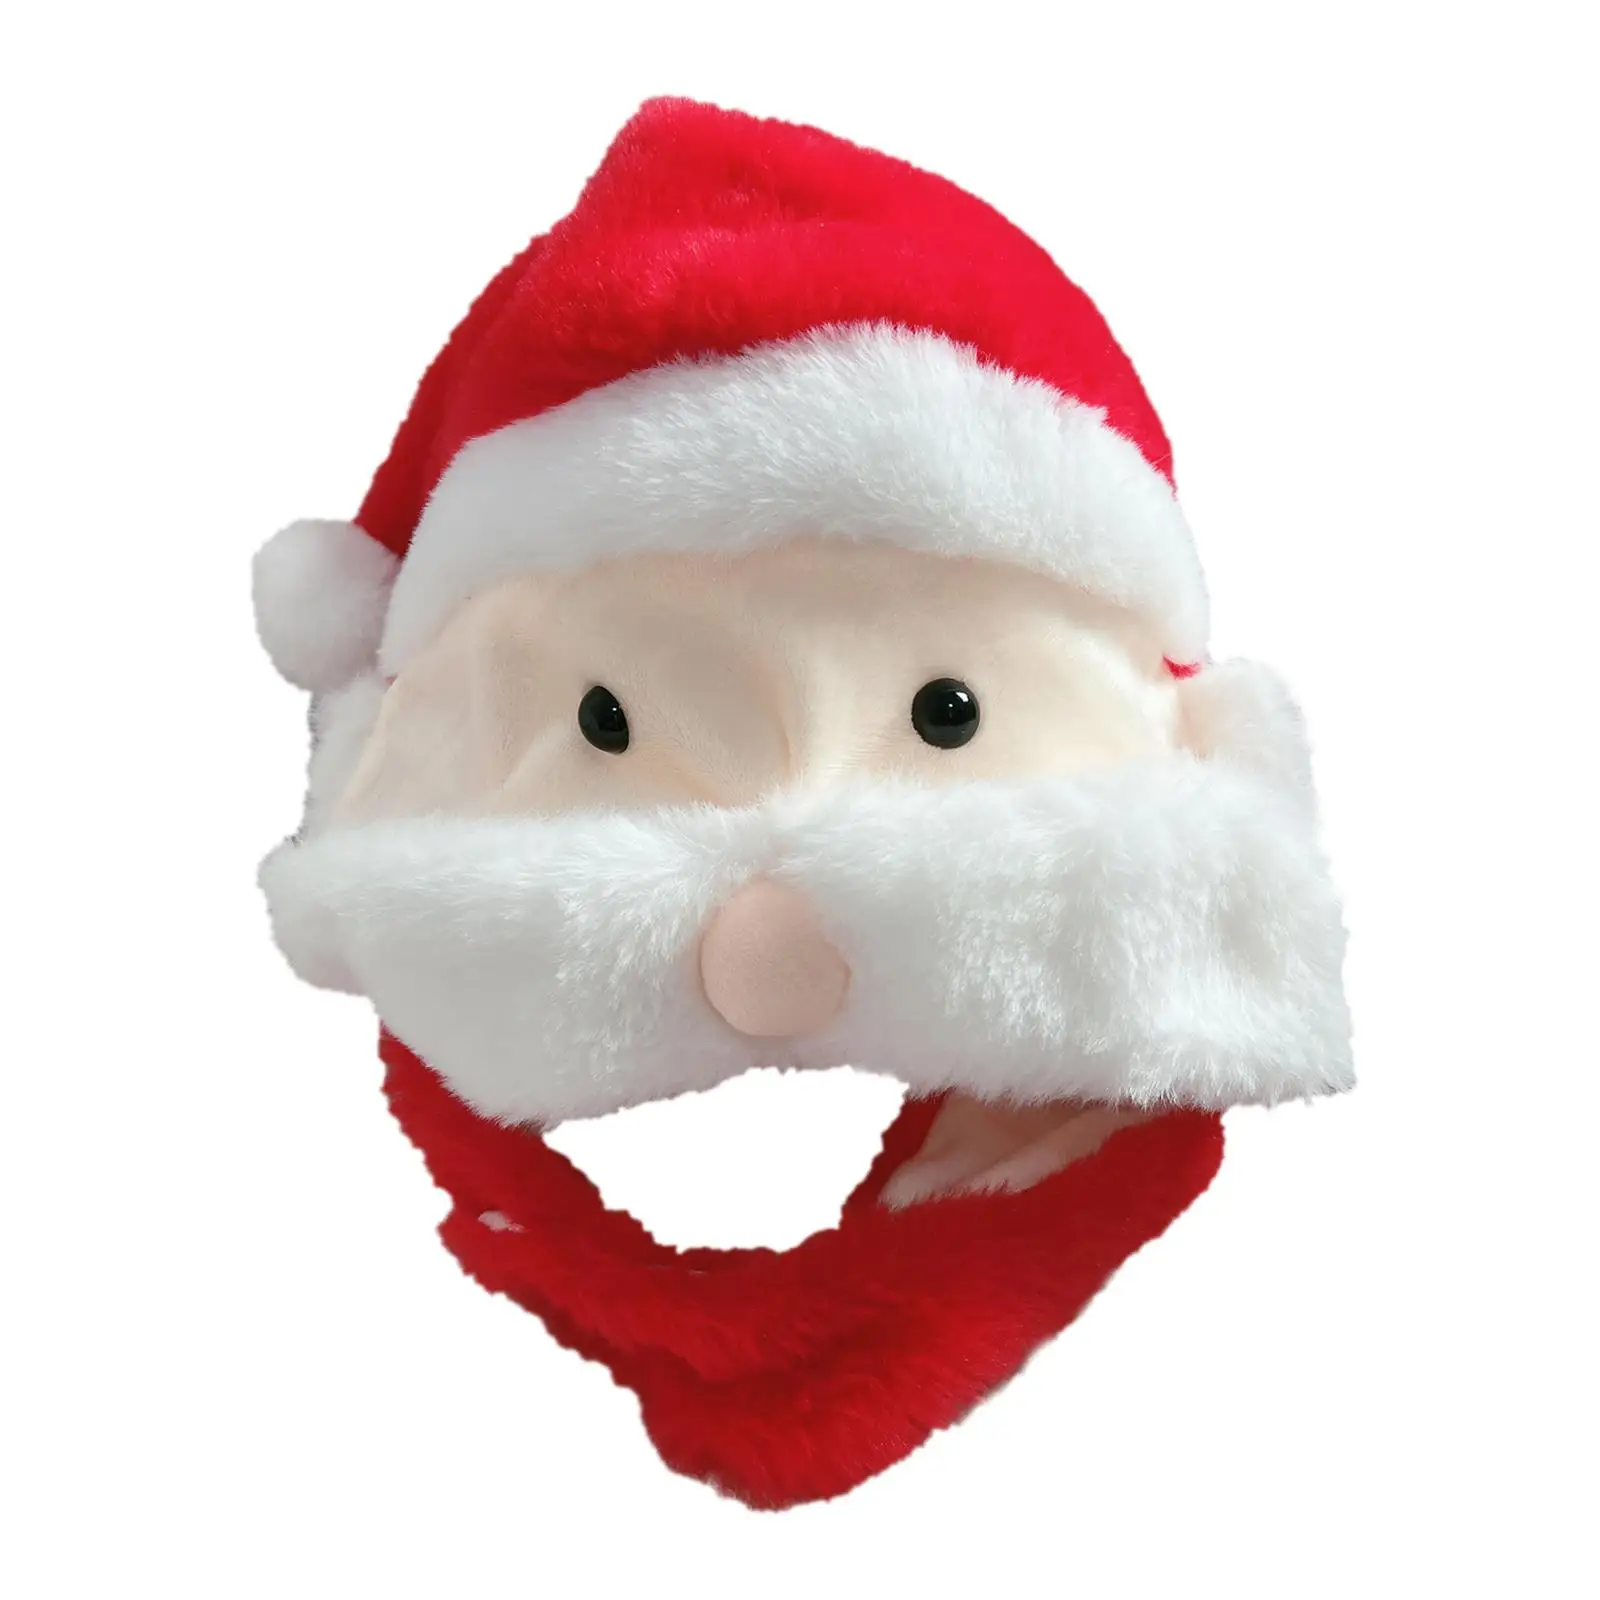 Soft Christmas Plush Hat Adult Kids Headgear Winter Novelty Xmas Hat Warm Cute for Party Fancy Dress Costume New Year Festival